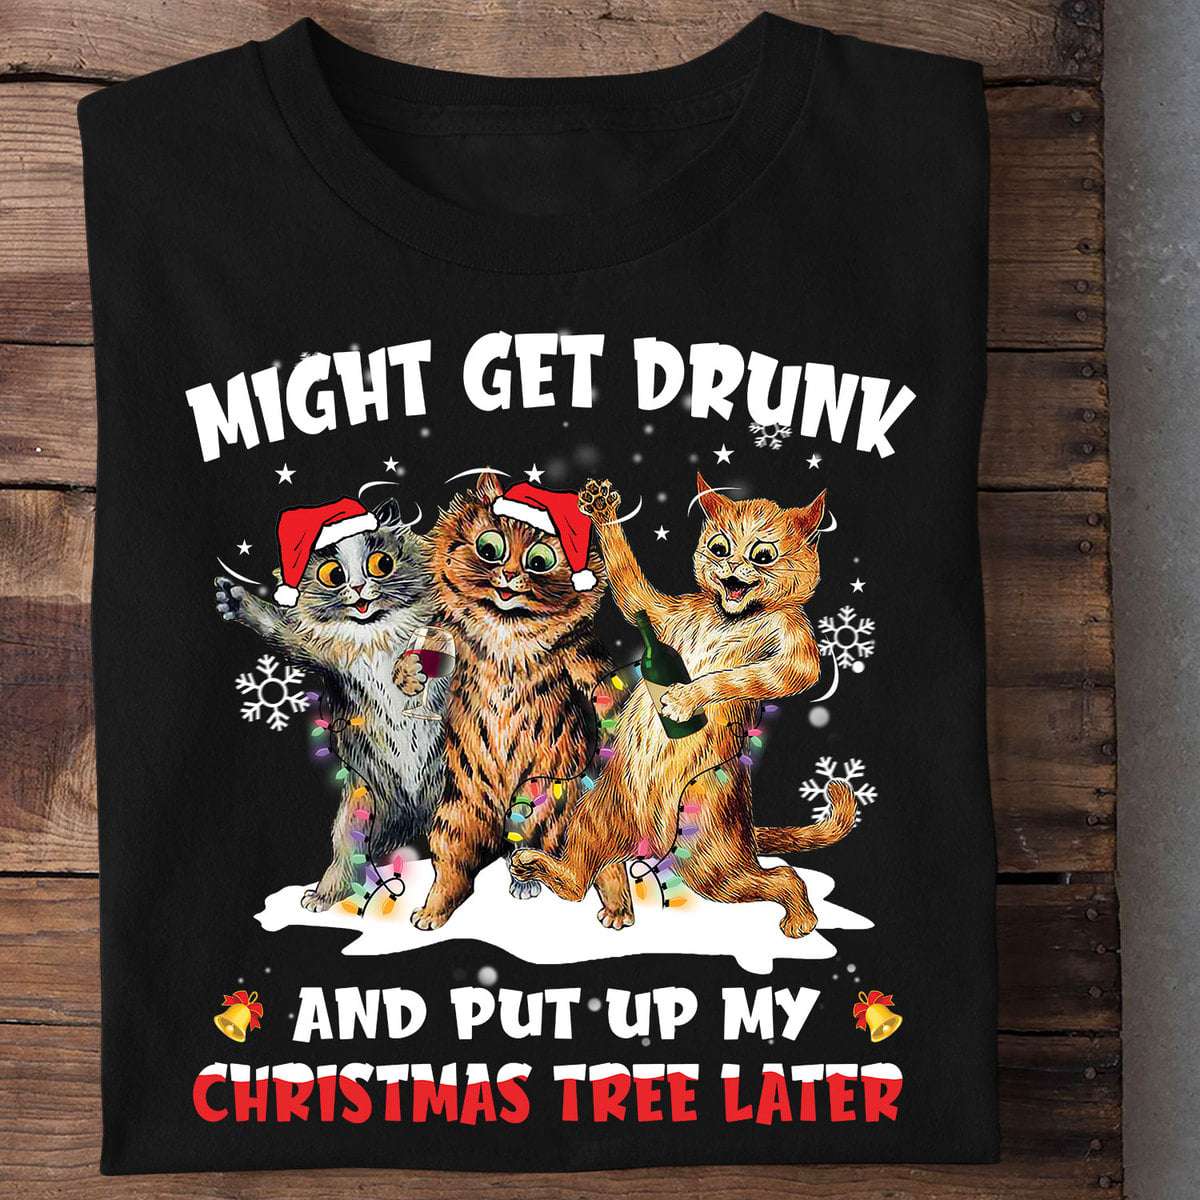 Might get drunk and put up my Christmas tree later - Christmas day gift, drunk crazy cat